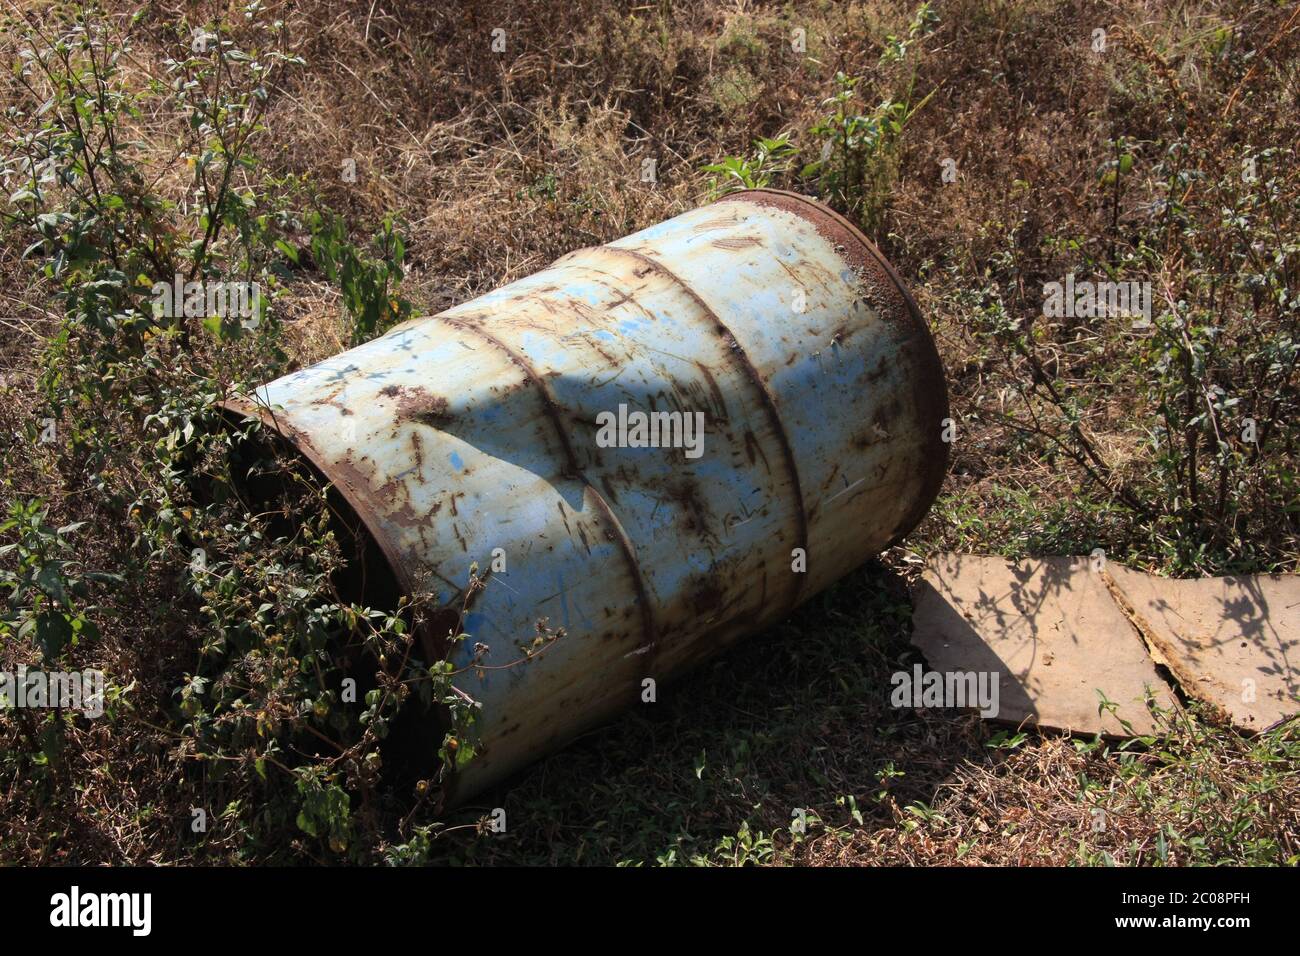 Old Oil Drum/Barrel left damaged on the ground with a dent/dint in the side and surrounded with weeds Stock Photo